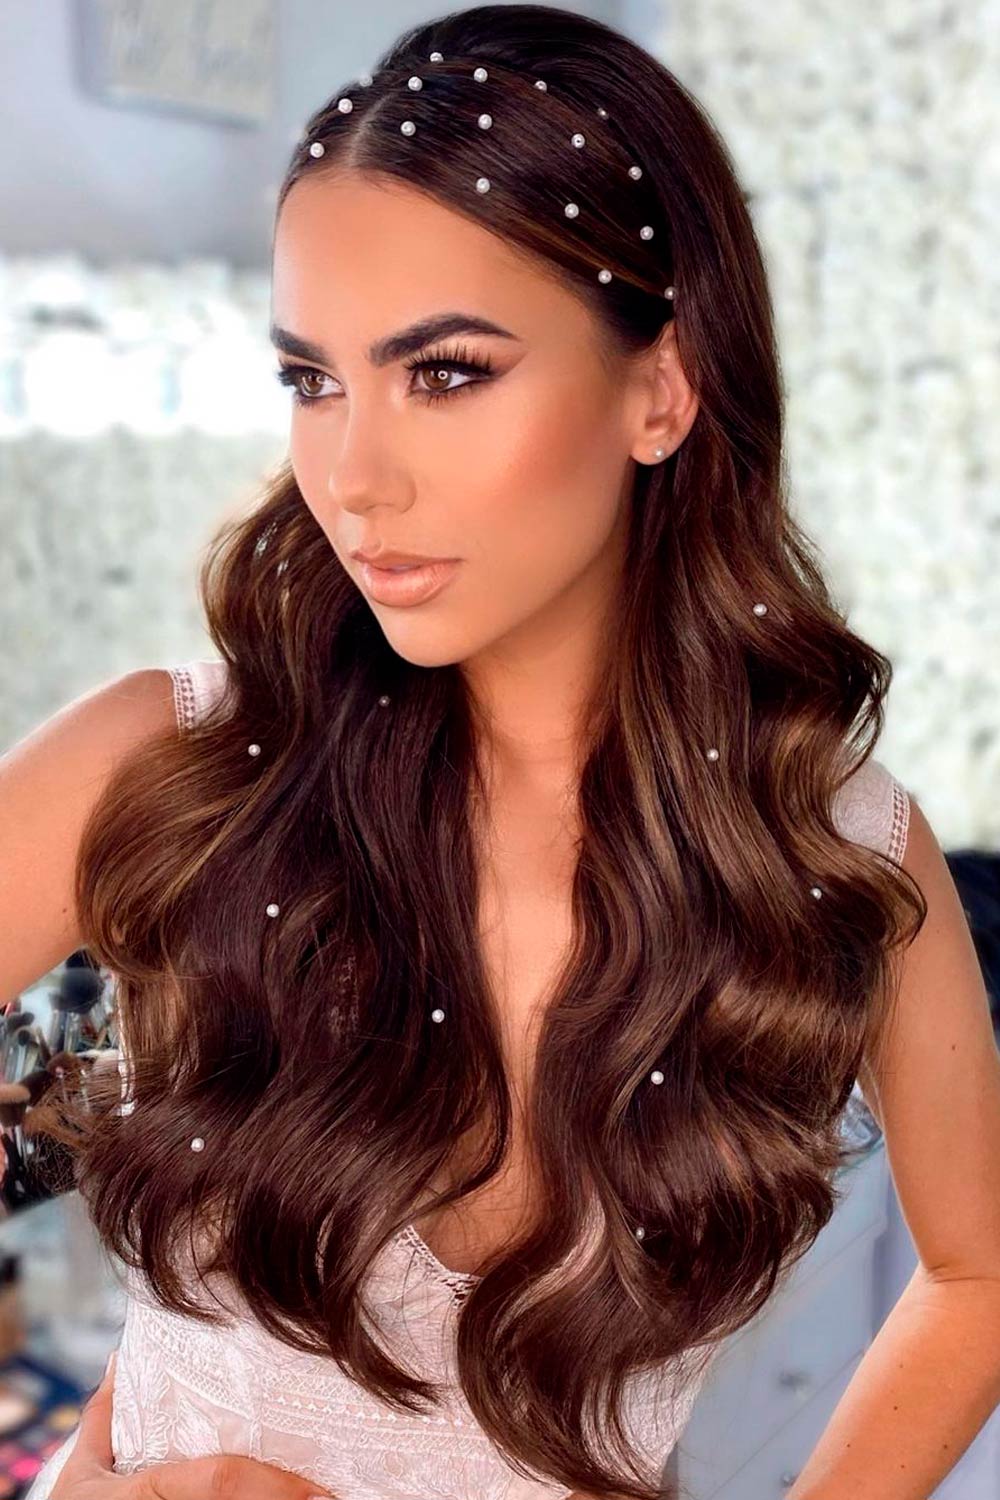 Do not be afraid to add some glitz and glam to your Christmas hair styles